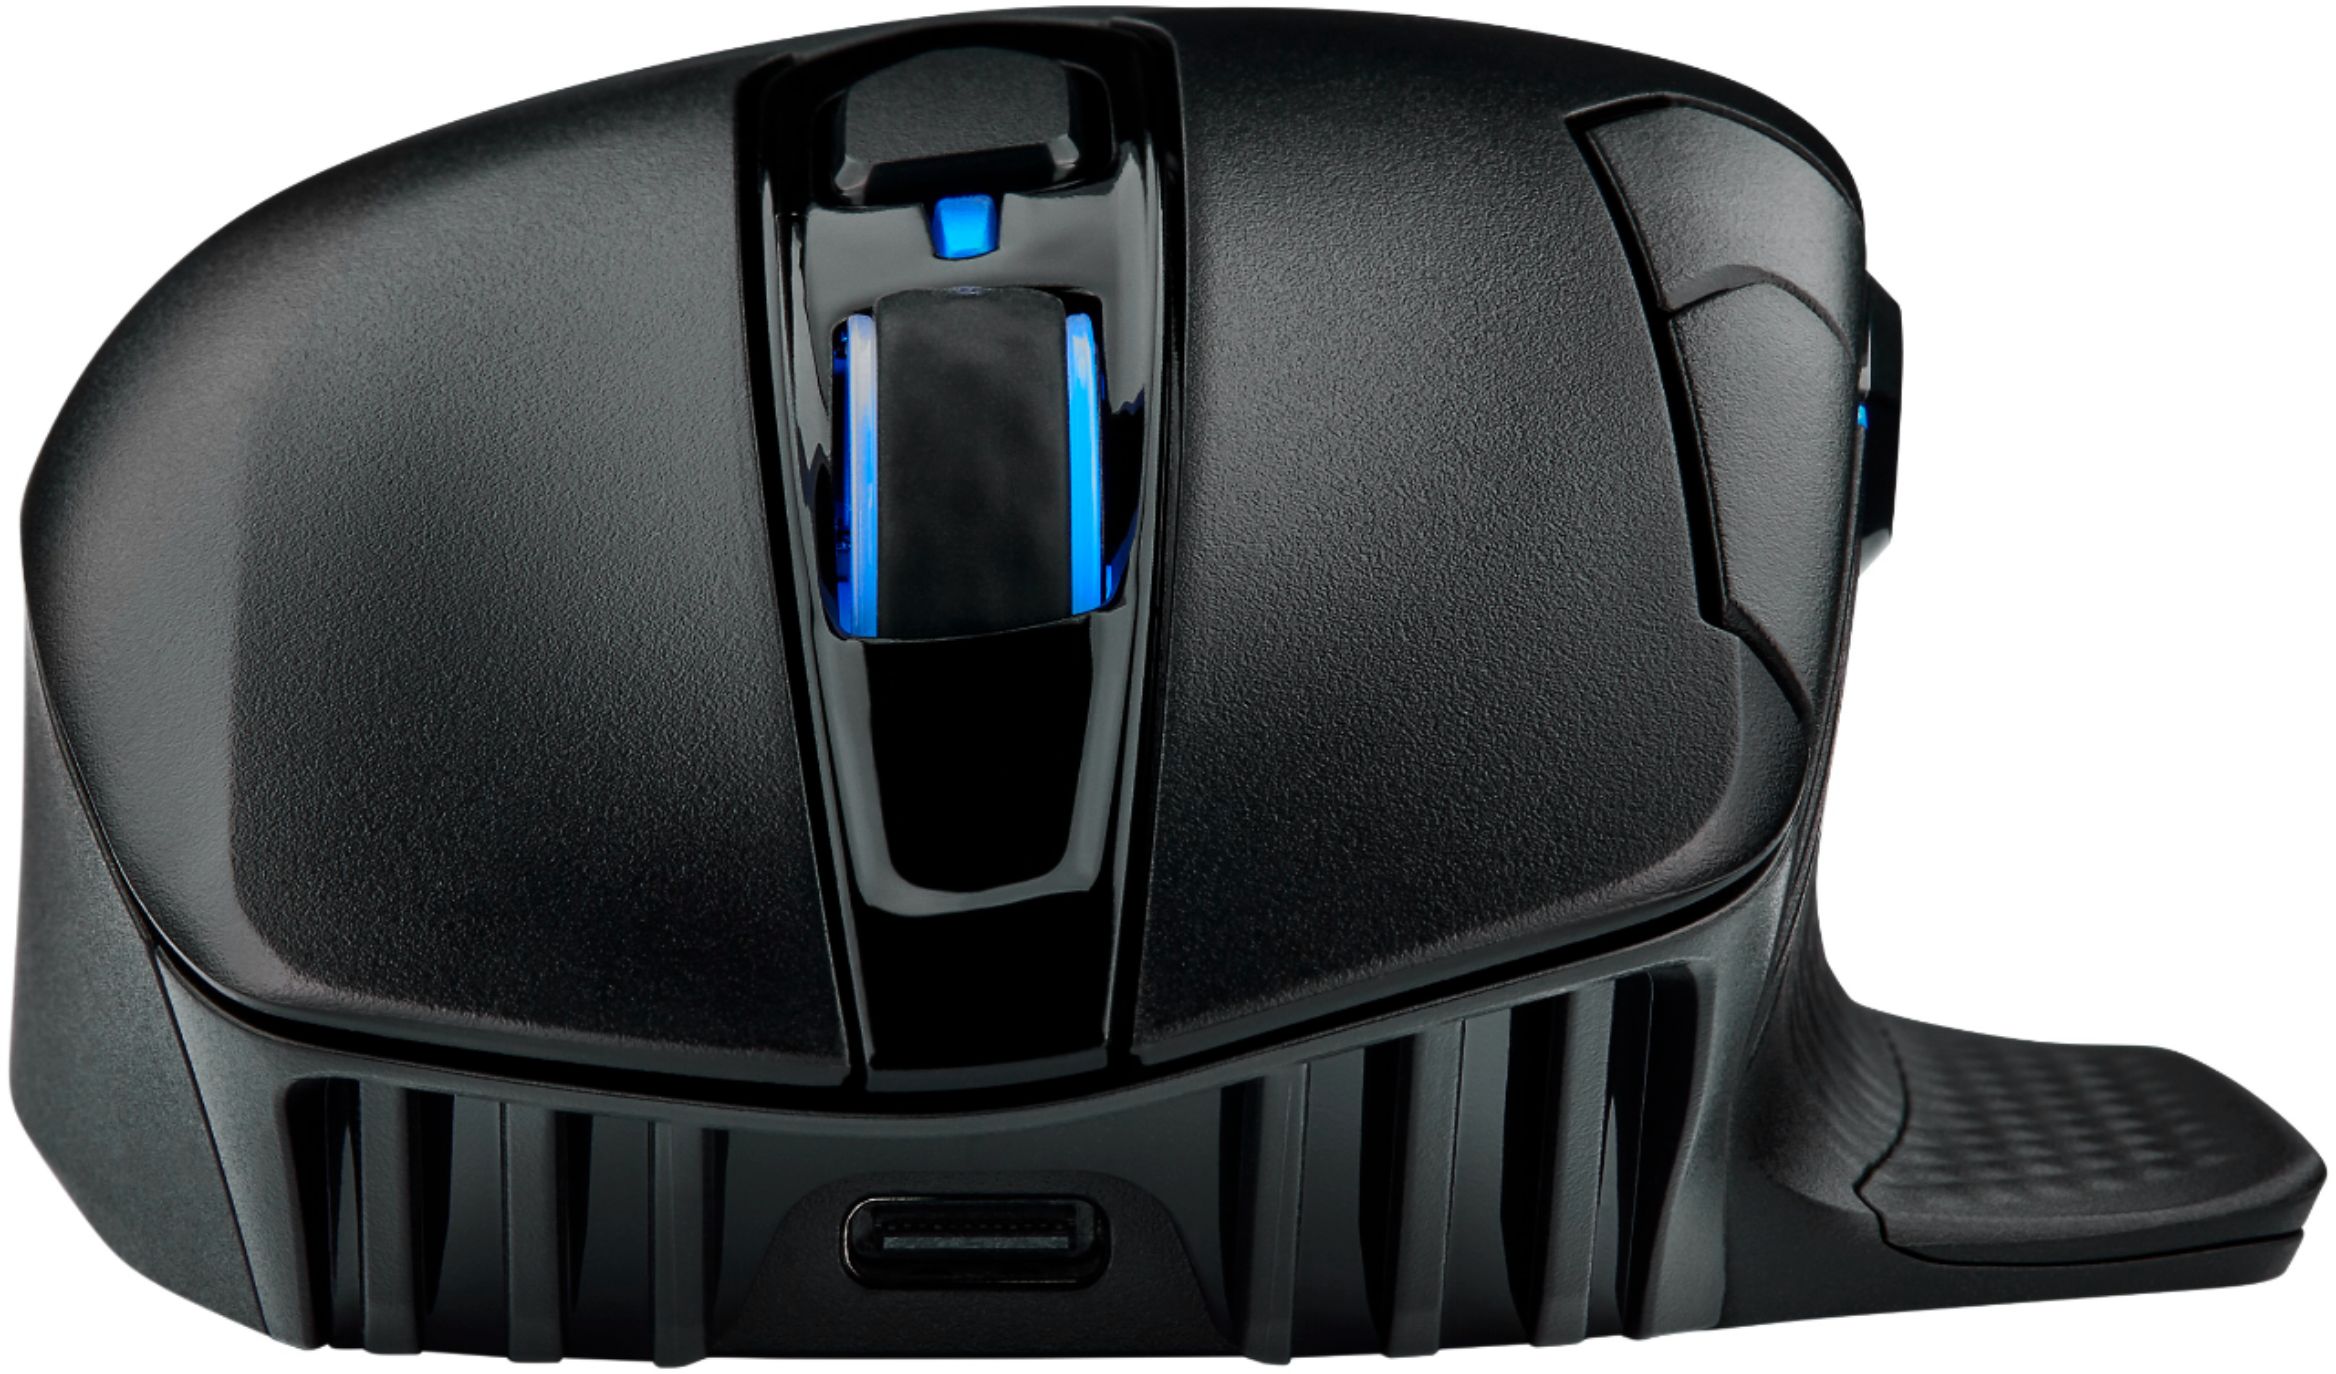 CORSAIR DARK CORE RGB PRO Wireless Optical Gaming Mouse with 